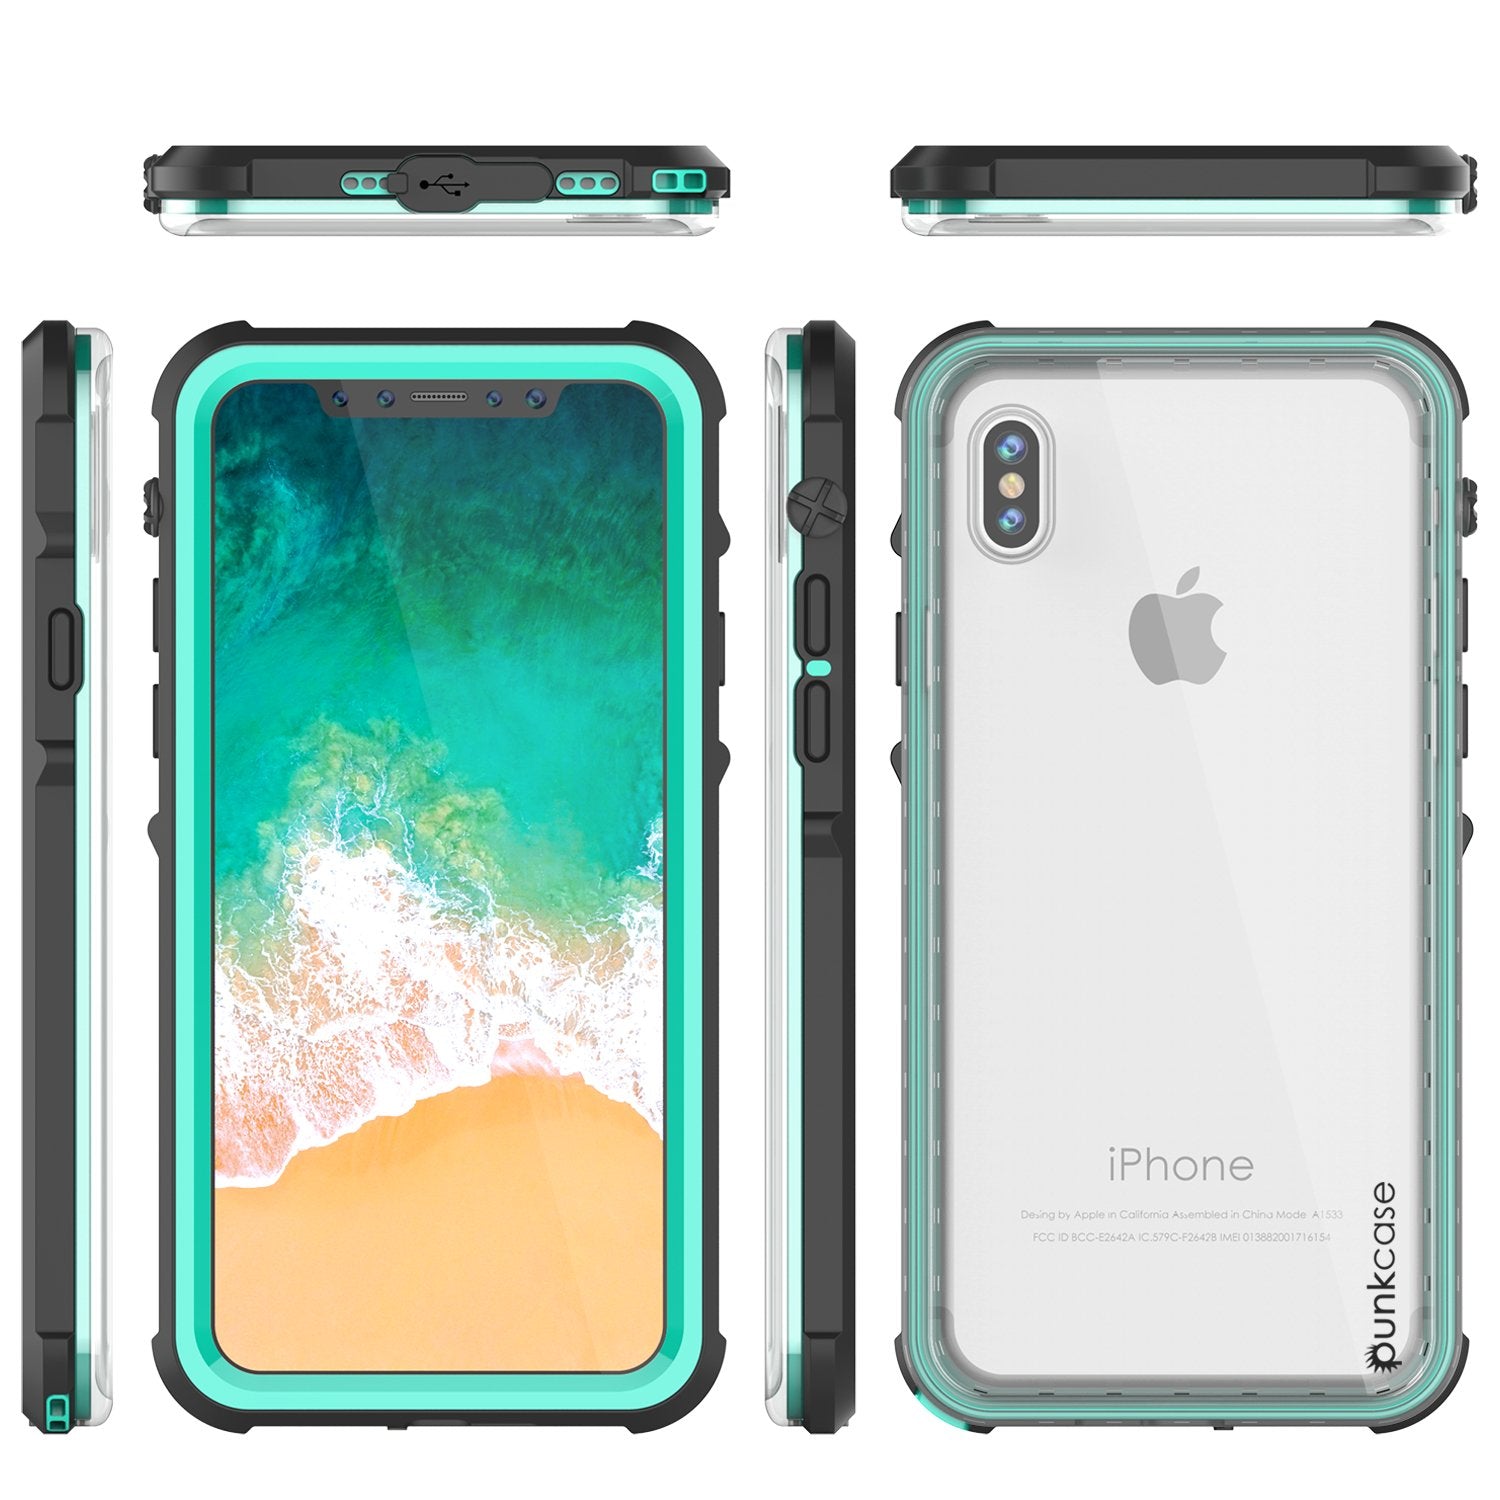 iPhone X Case, PUNKCase [CRYSTAL SERIES] Protective IP68 Certified Cover W/ Attached Screen Protector - DustPROOF, ShockPROOF, SnowPROOF - Ultra Slim Fit for Apple iPhone 10 [TEAL]